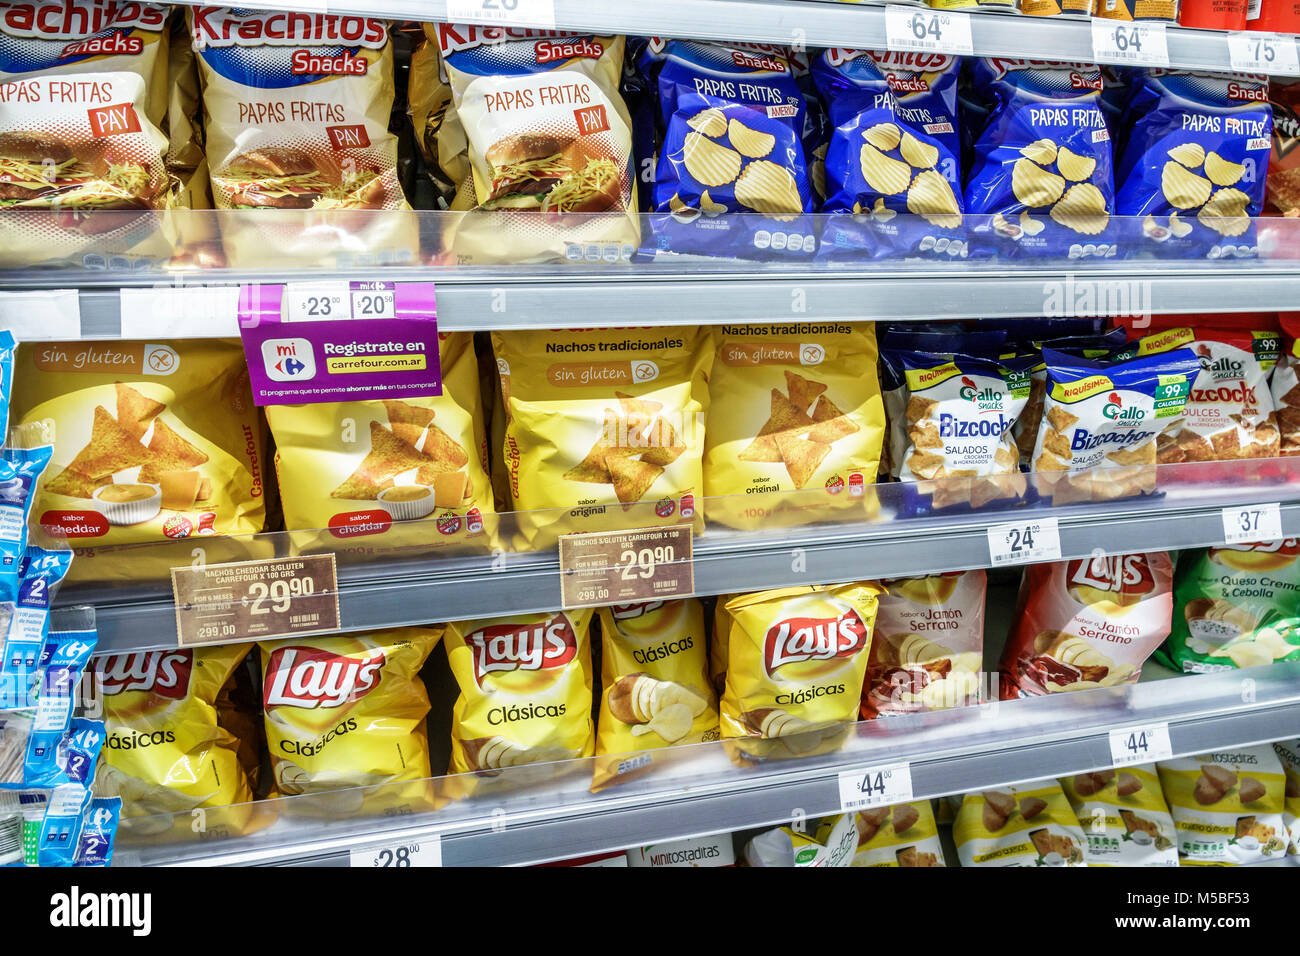 Buenos Aires Argentina,Carrefour Express convenience store grocery supermarket food,interior inside,snacks,potato chips,Lay's,brand,shelves display,vi Stock Photo